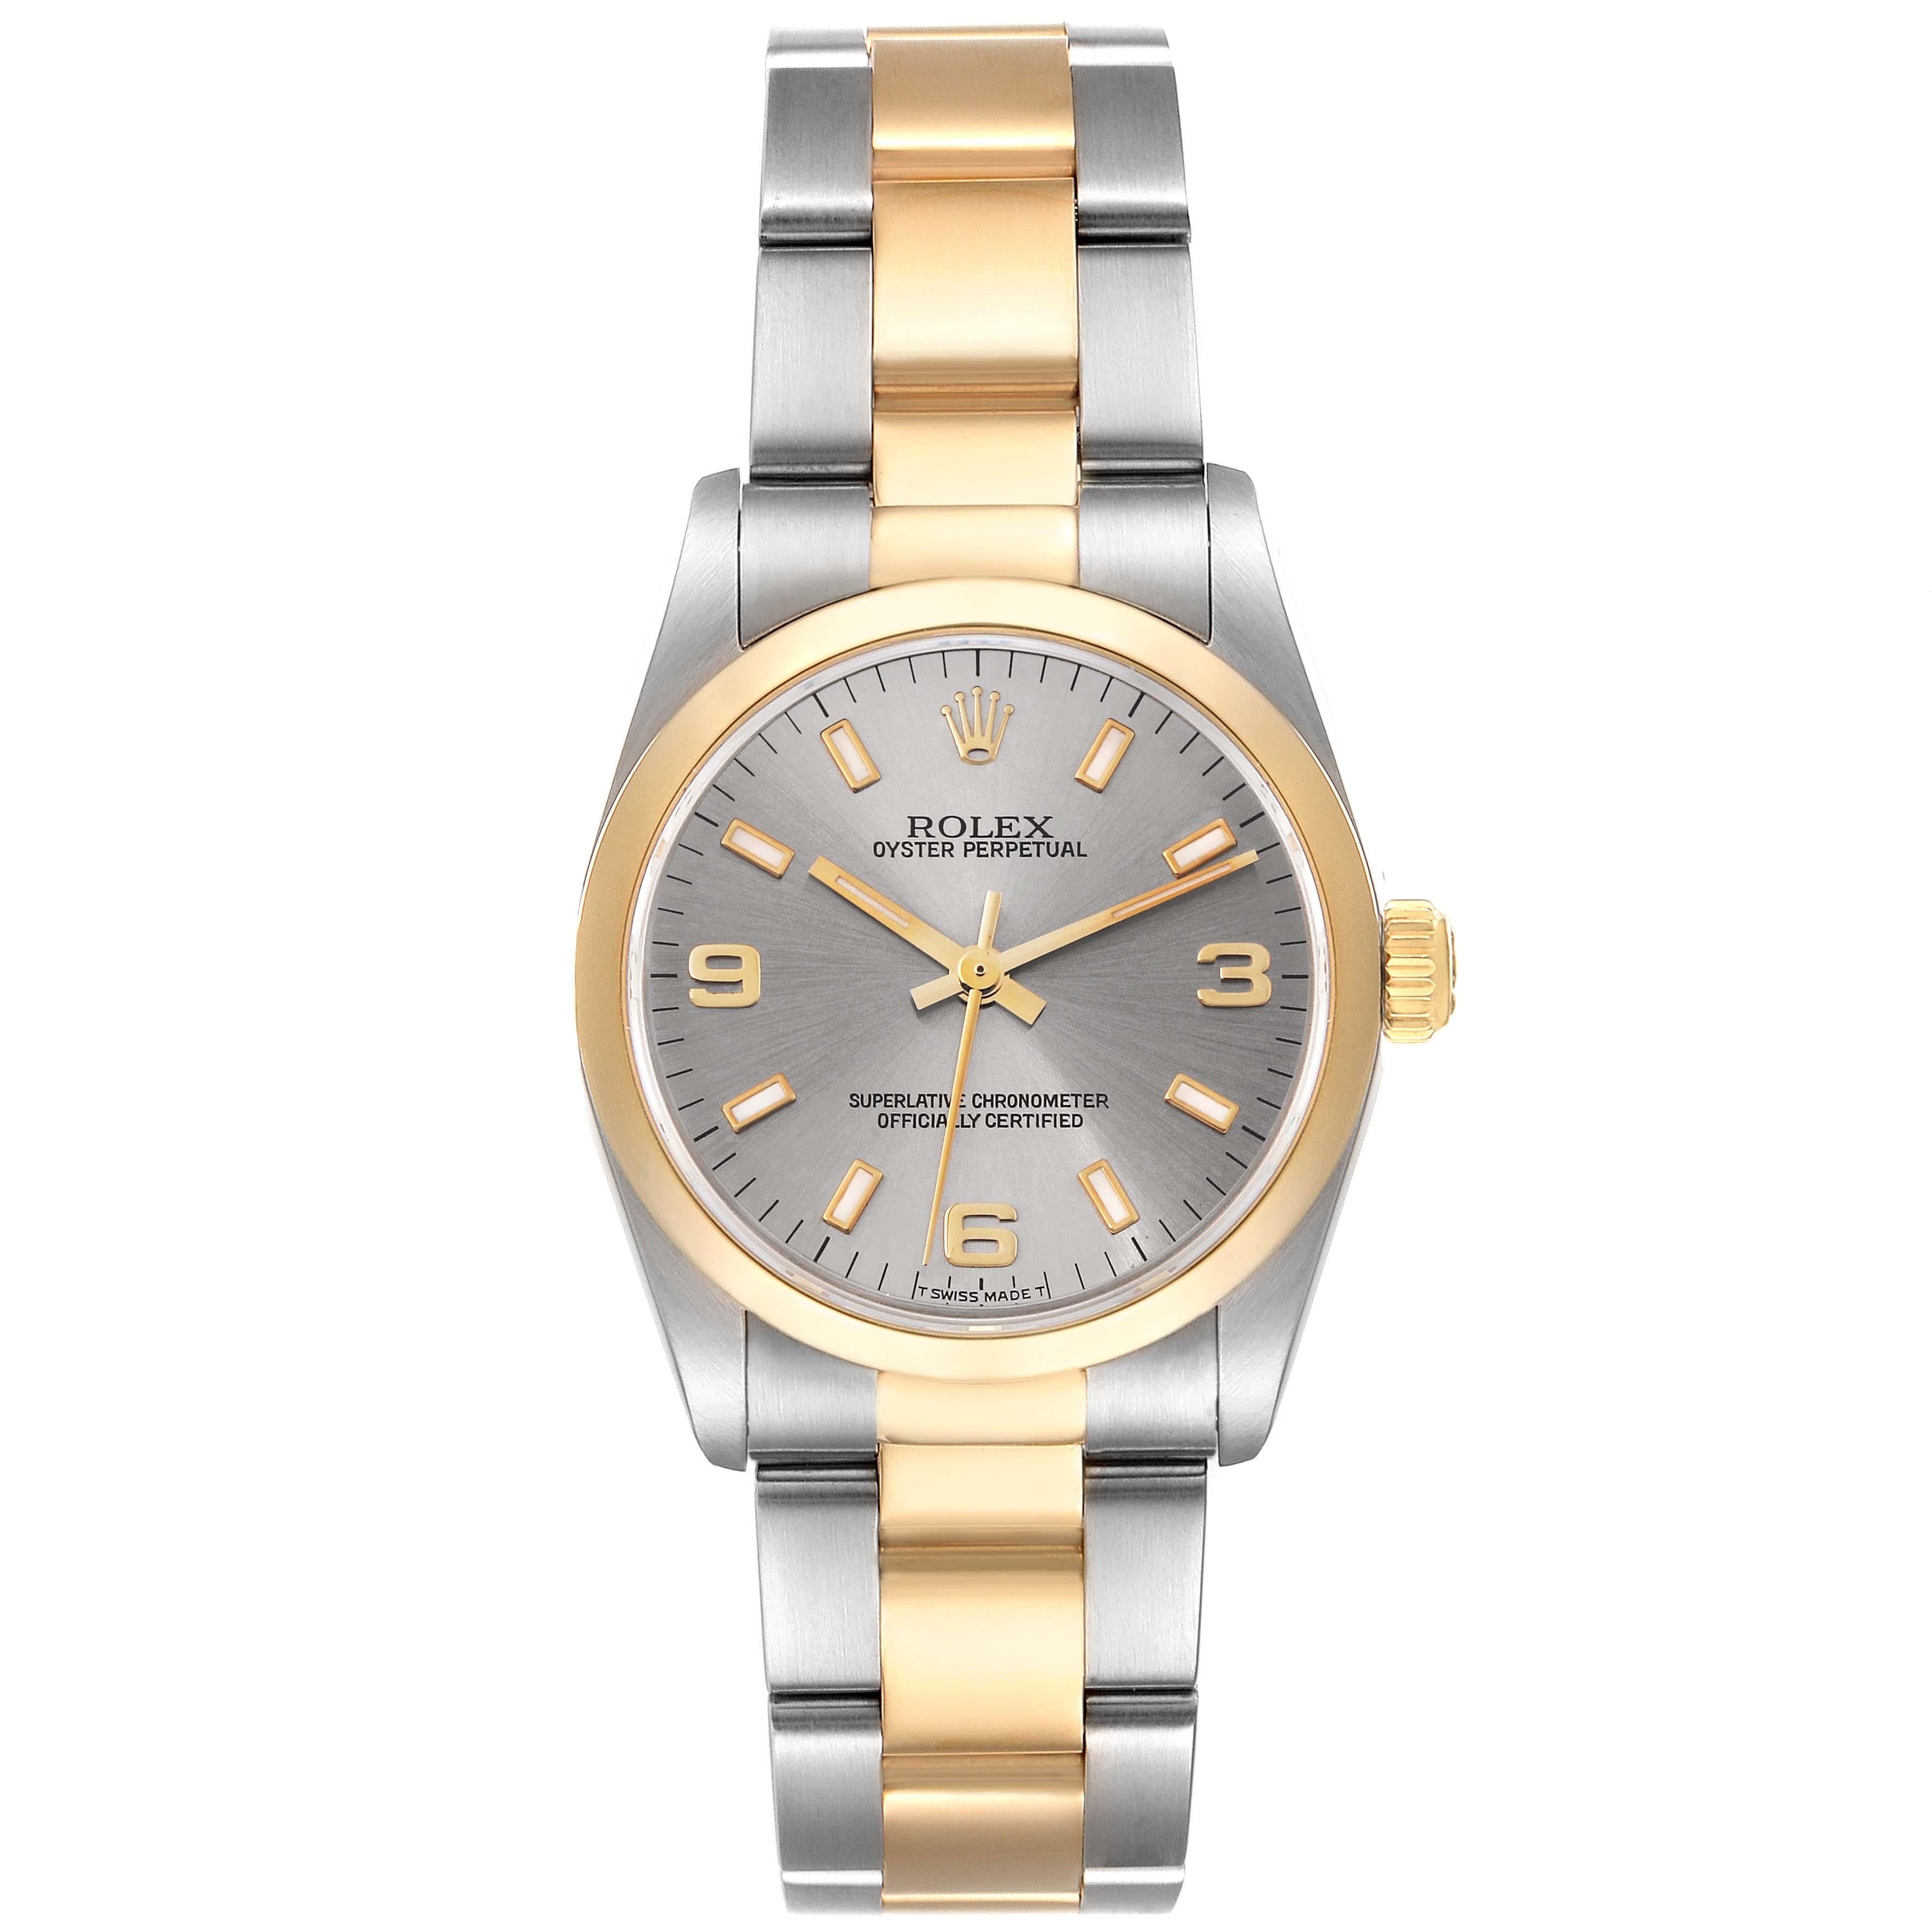 Rolex Midsize 31 Slate Dial Yellow Gold Steel Ladies Watch 67483. Officially certified chronometer automatic self-winding movement. Stainless steel and 18K yellow gold round case 31 mm in diameter. Rolex logo on a crown. 18K yellow gold smooth domed